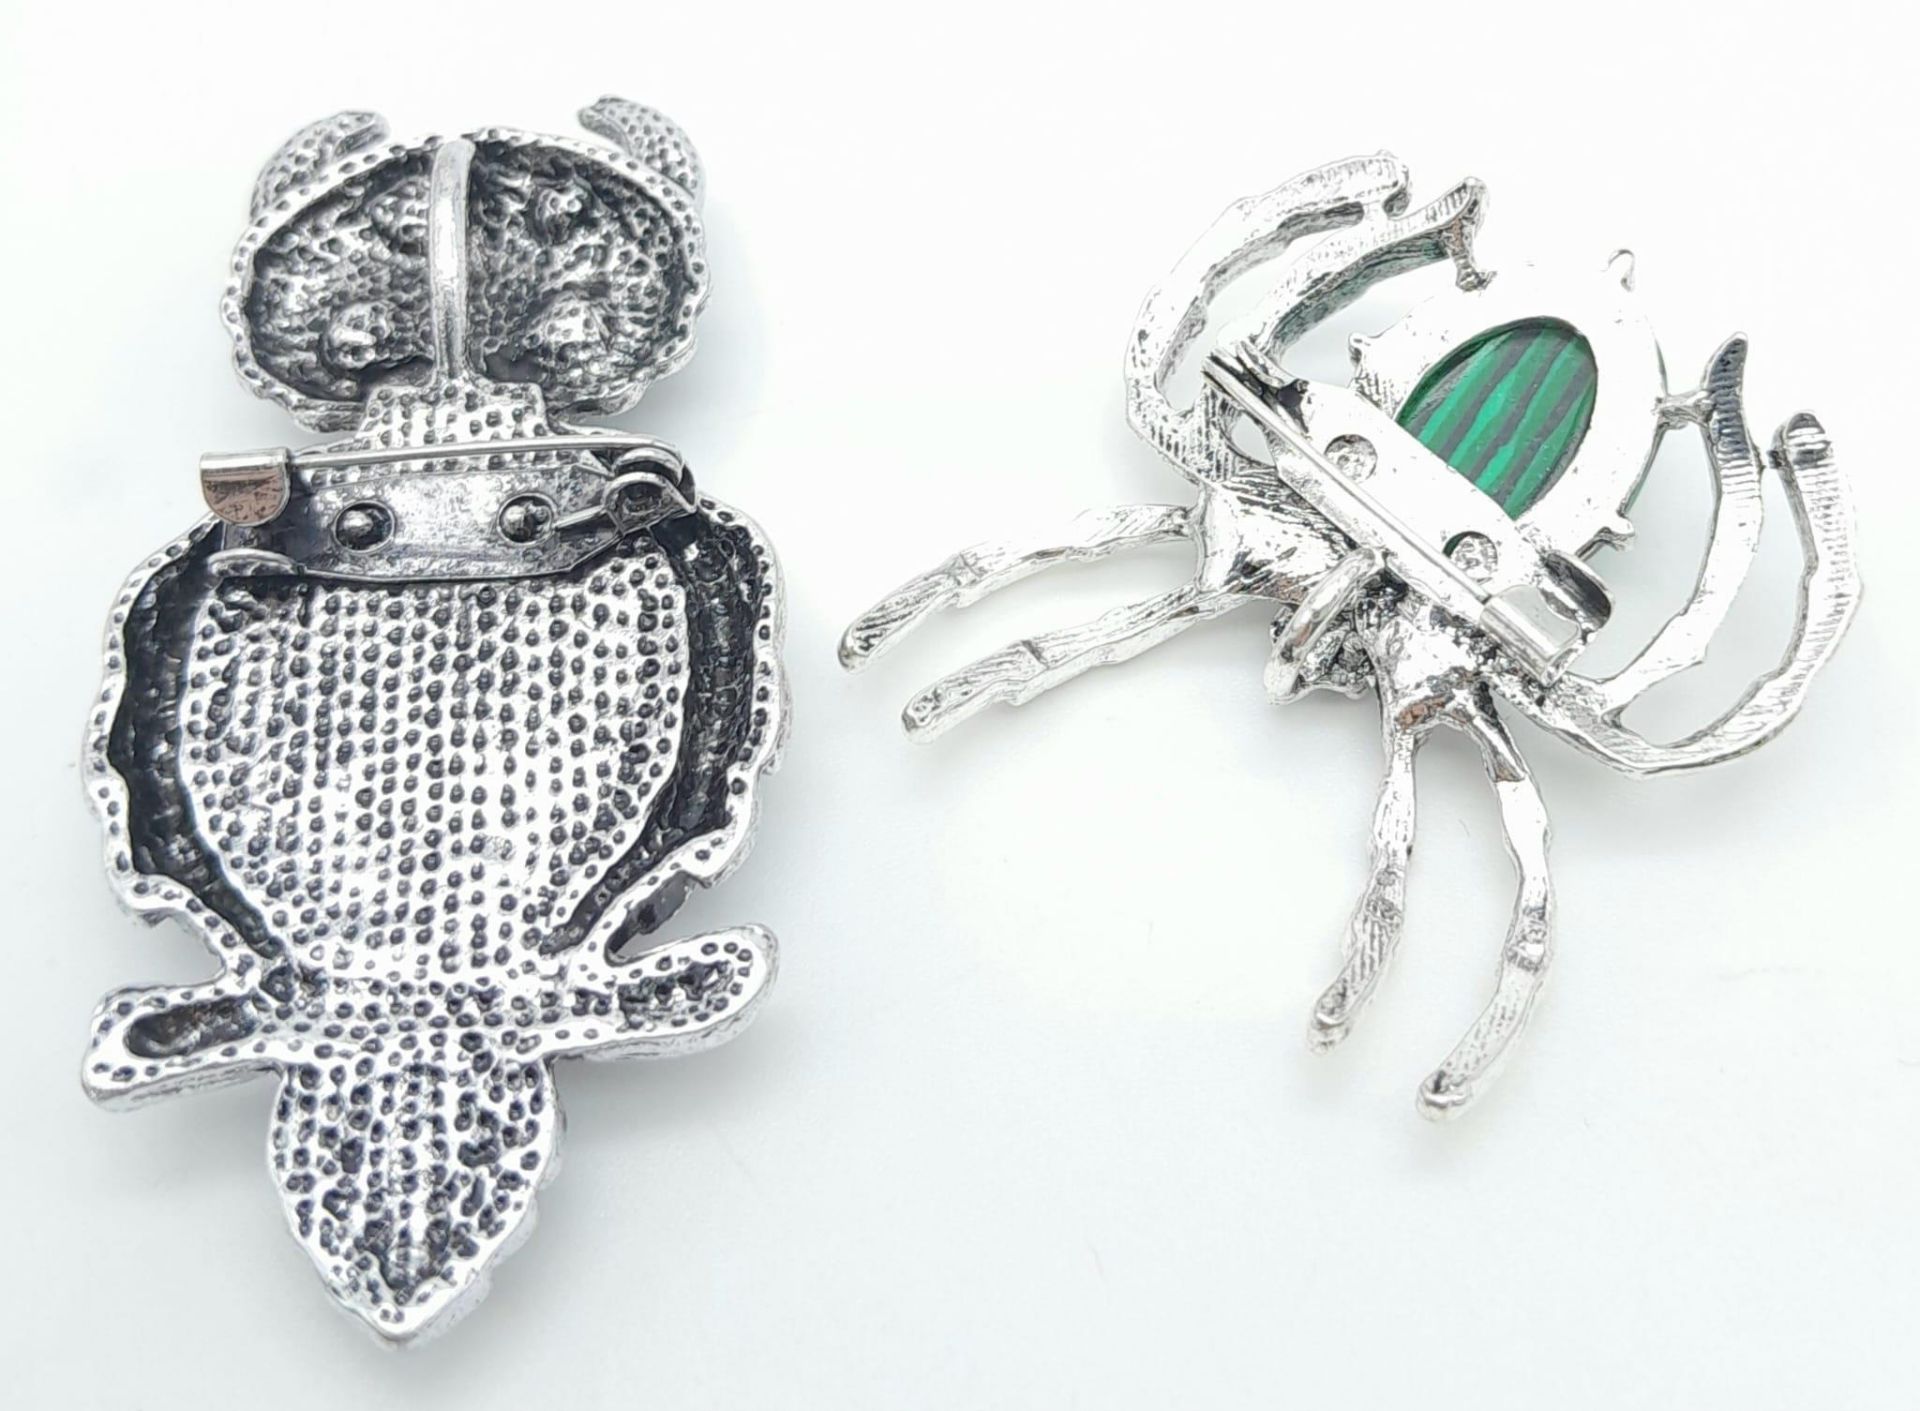 A Marcasite Spider and a Tigers Eye Owl Brooch. Owl - 6cm. - Image 2 of 5